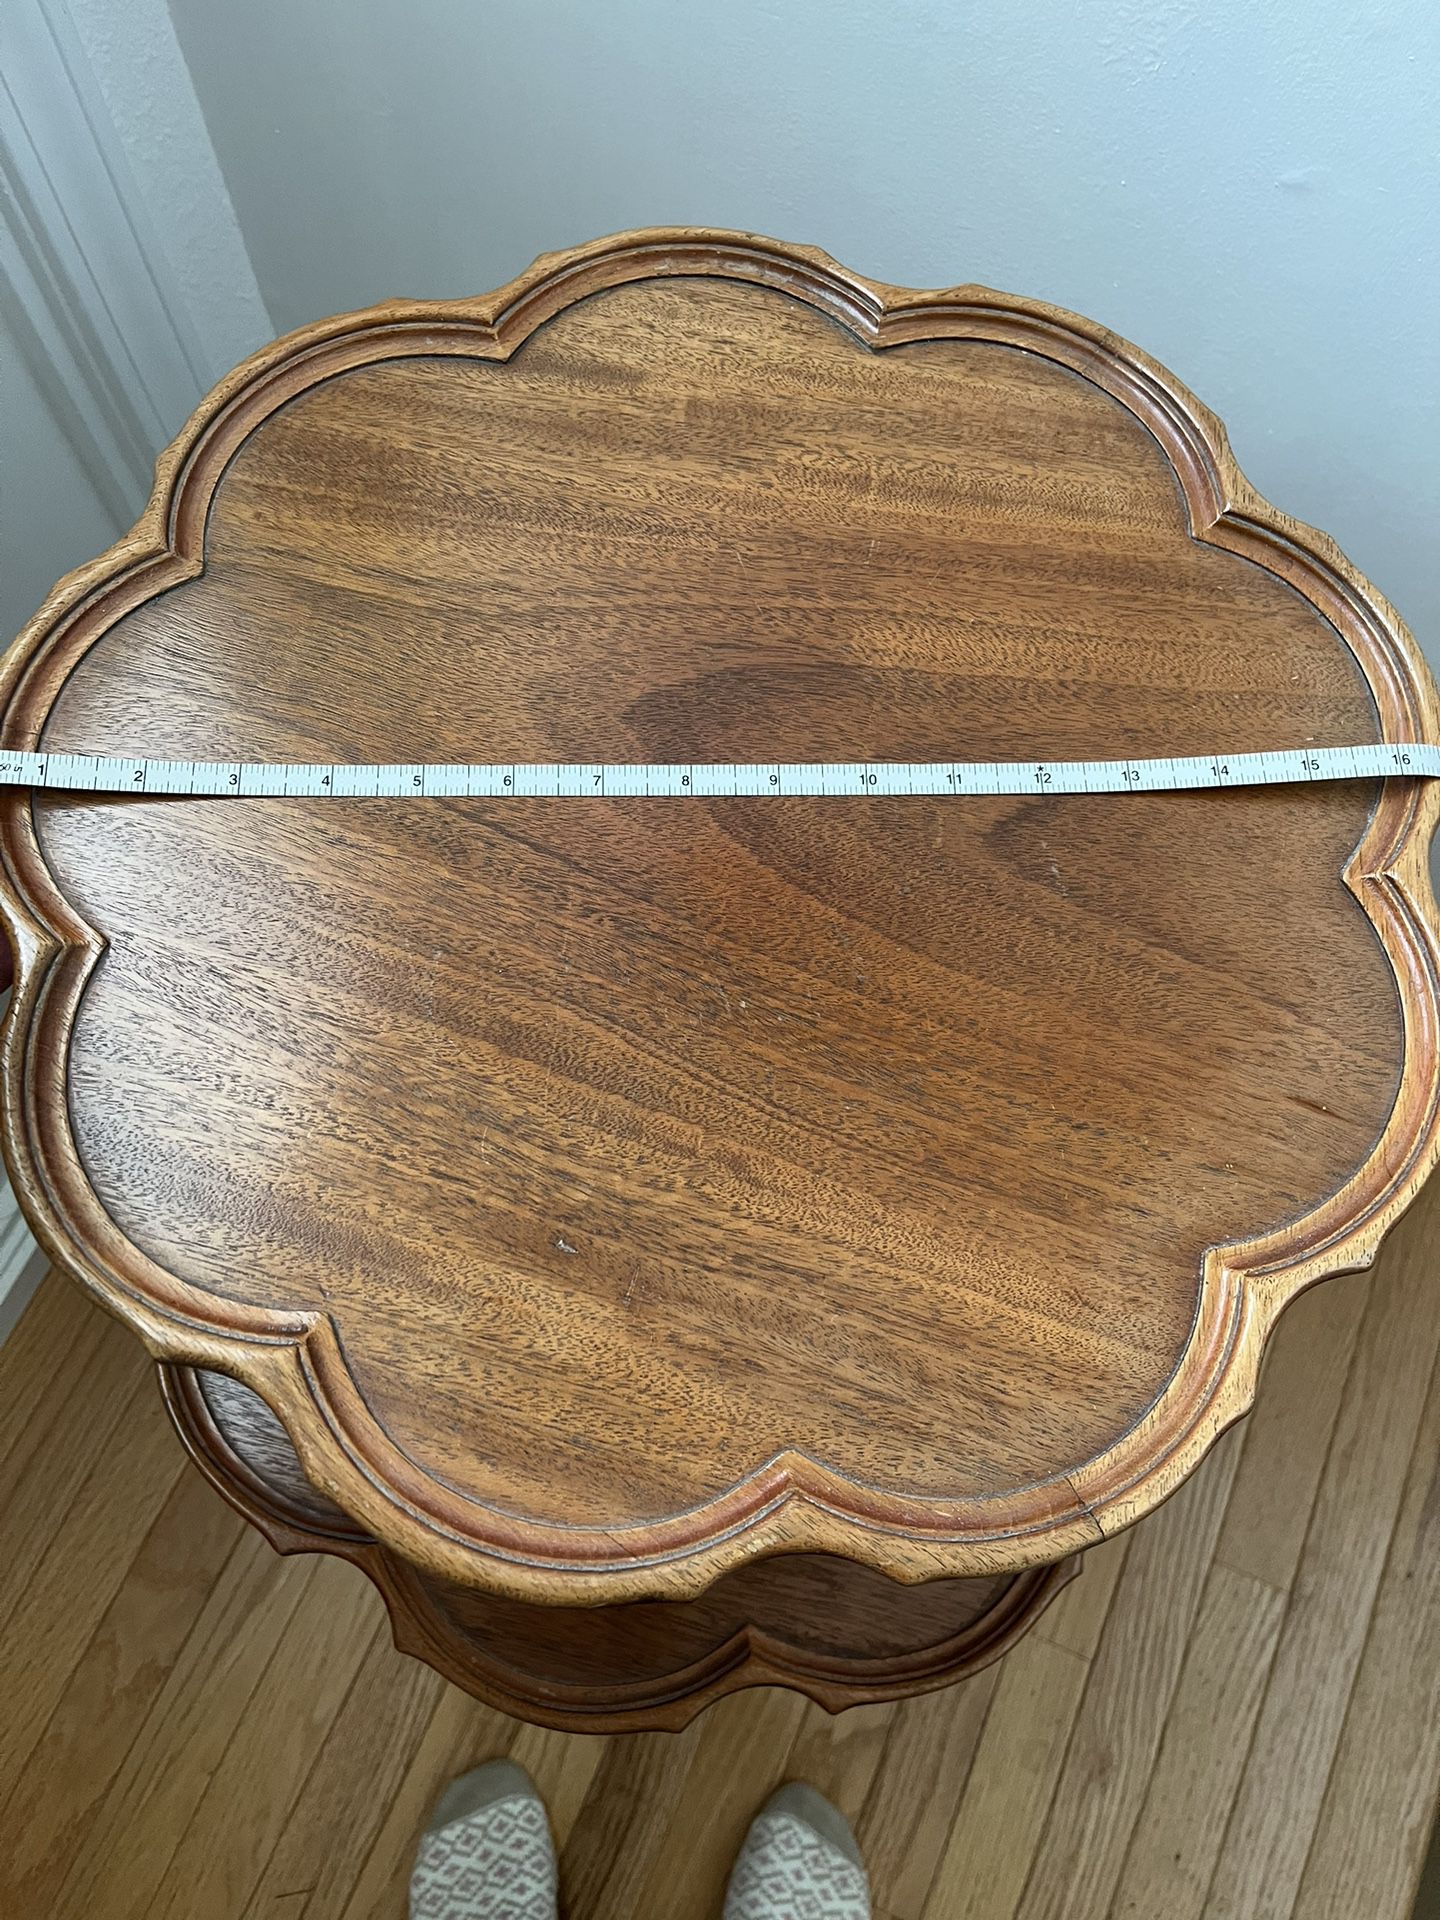 Mahogany 2-Tier Pie Crust Table From Mid-1900s